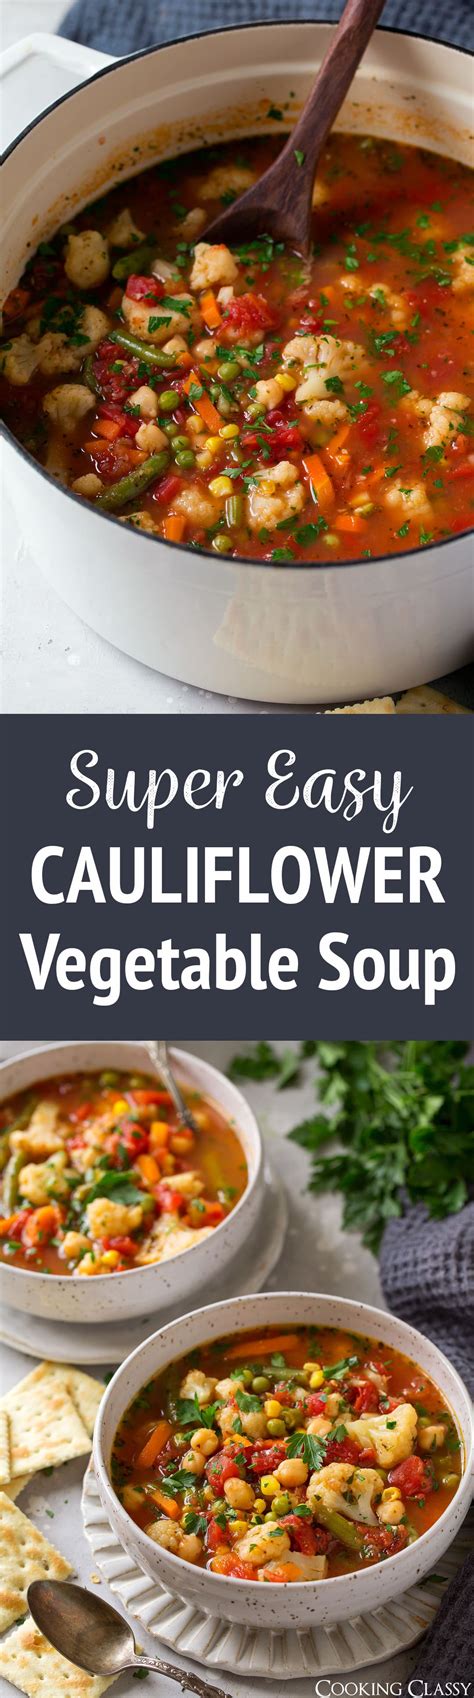 super-easy-cauliflower-vegetable-soup-cooking-classy image